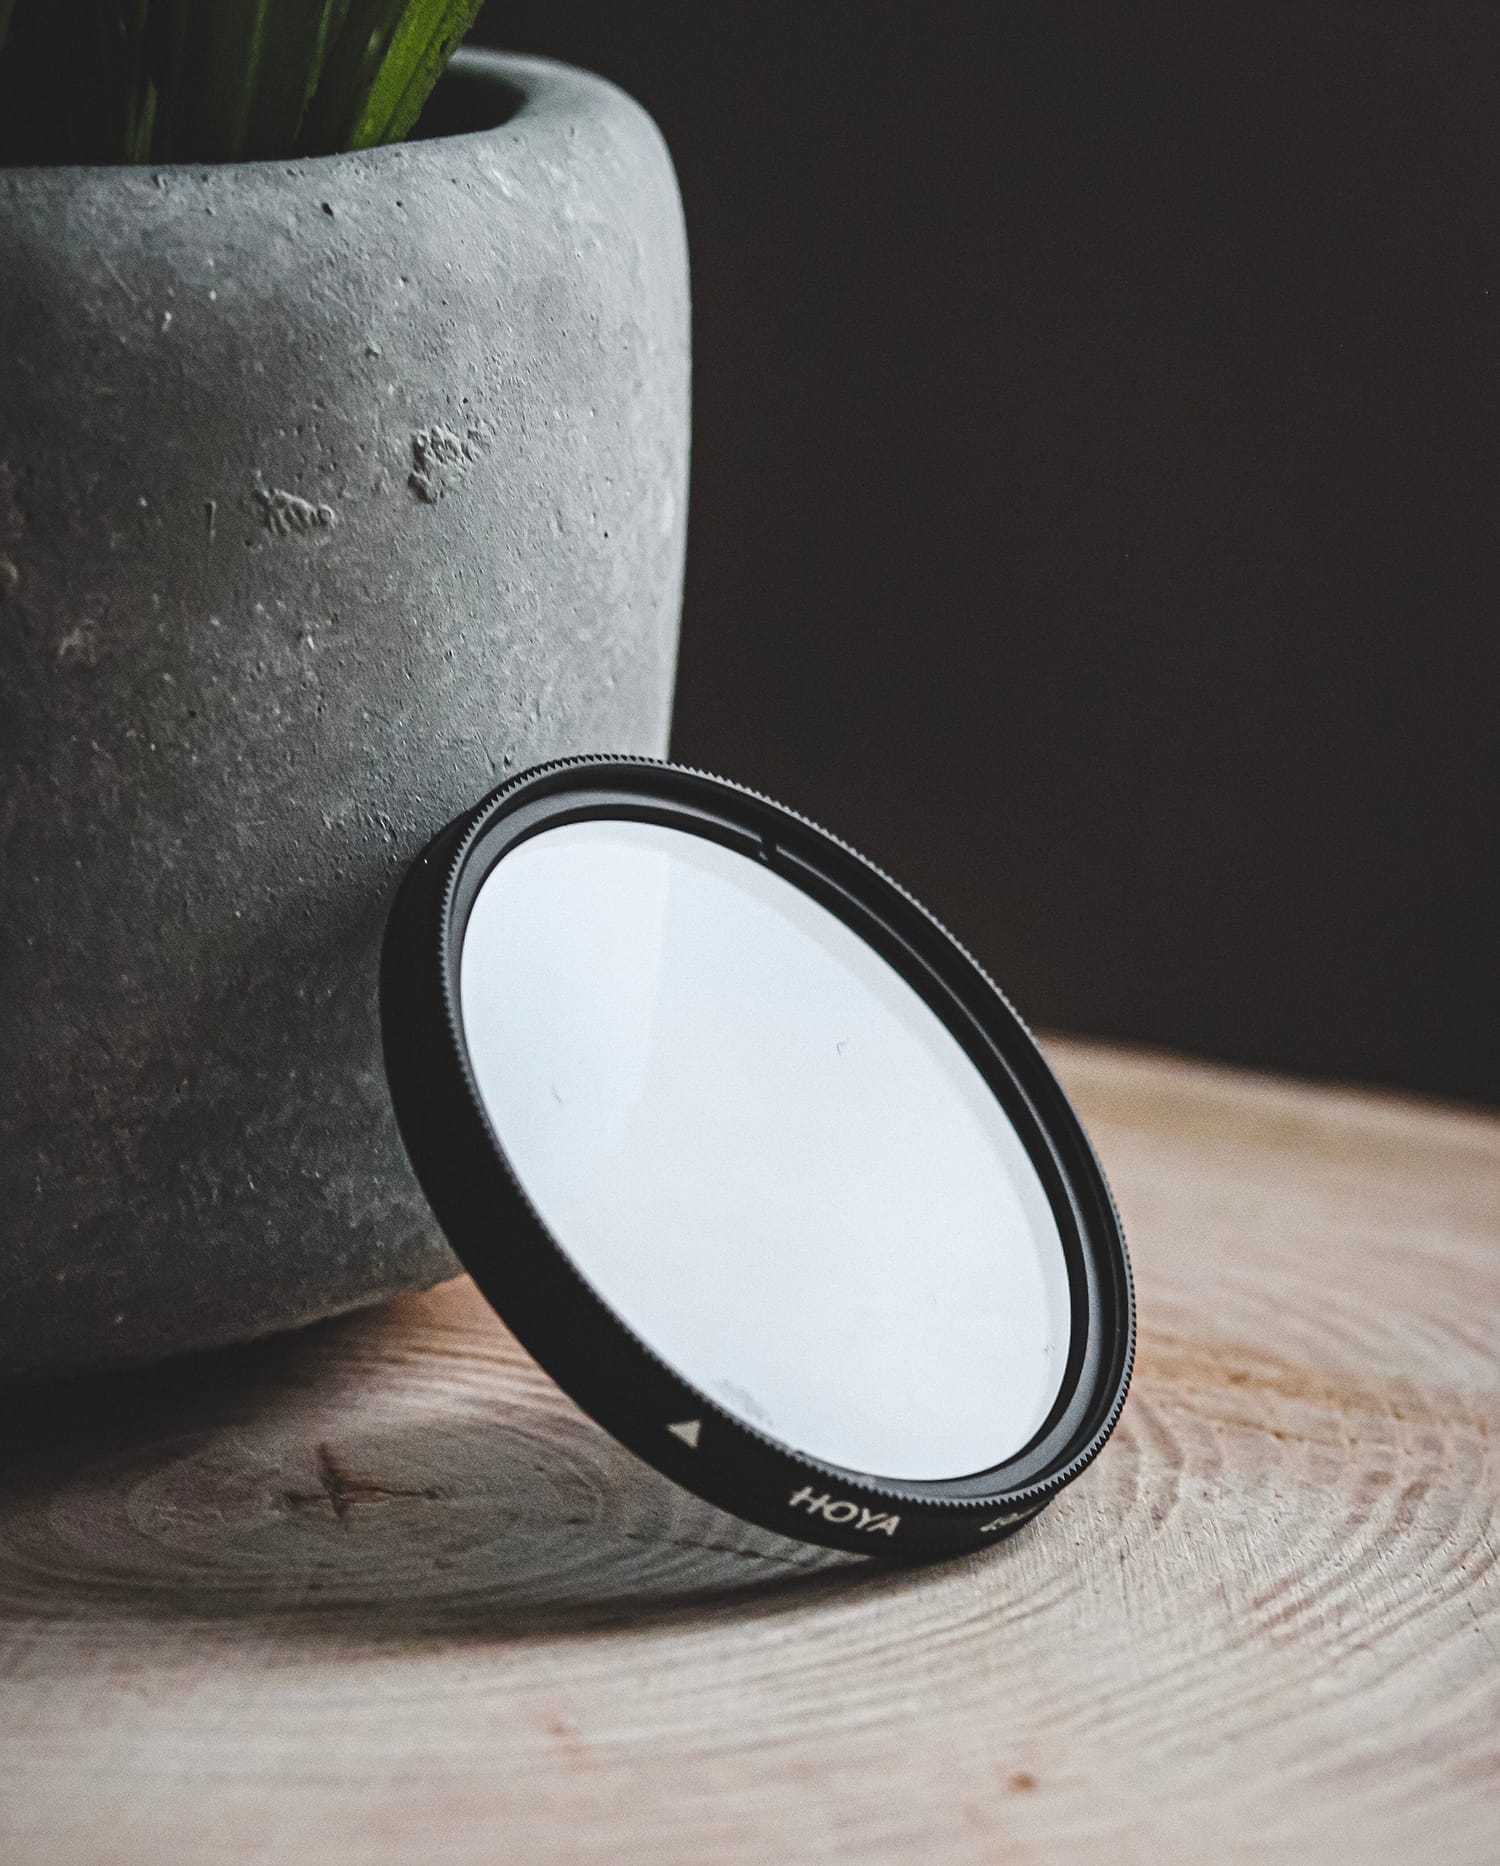 Take advantage of neutral density (ND) filters